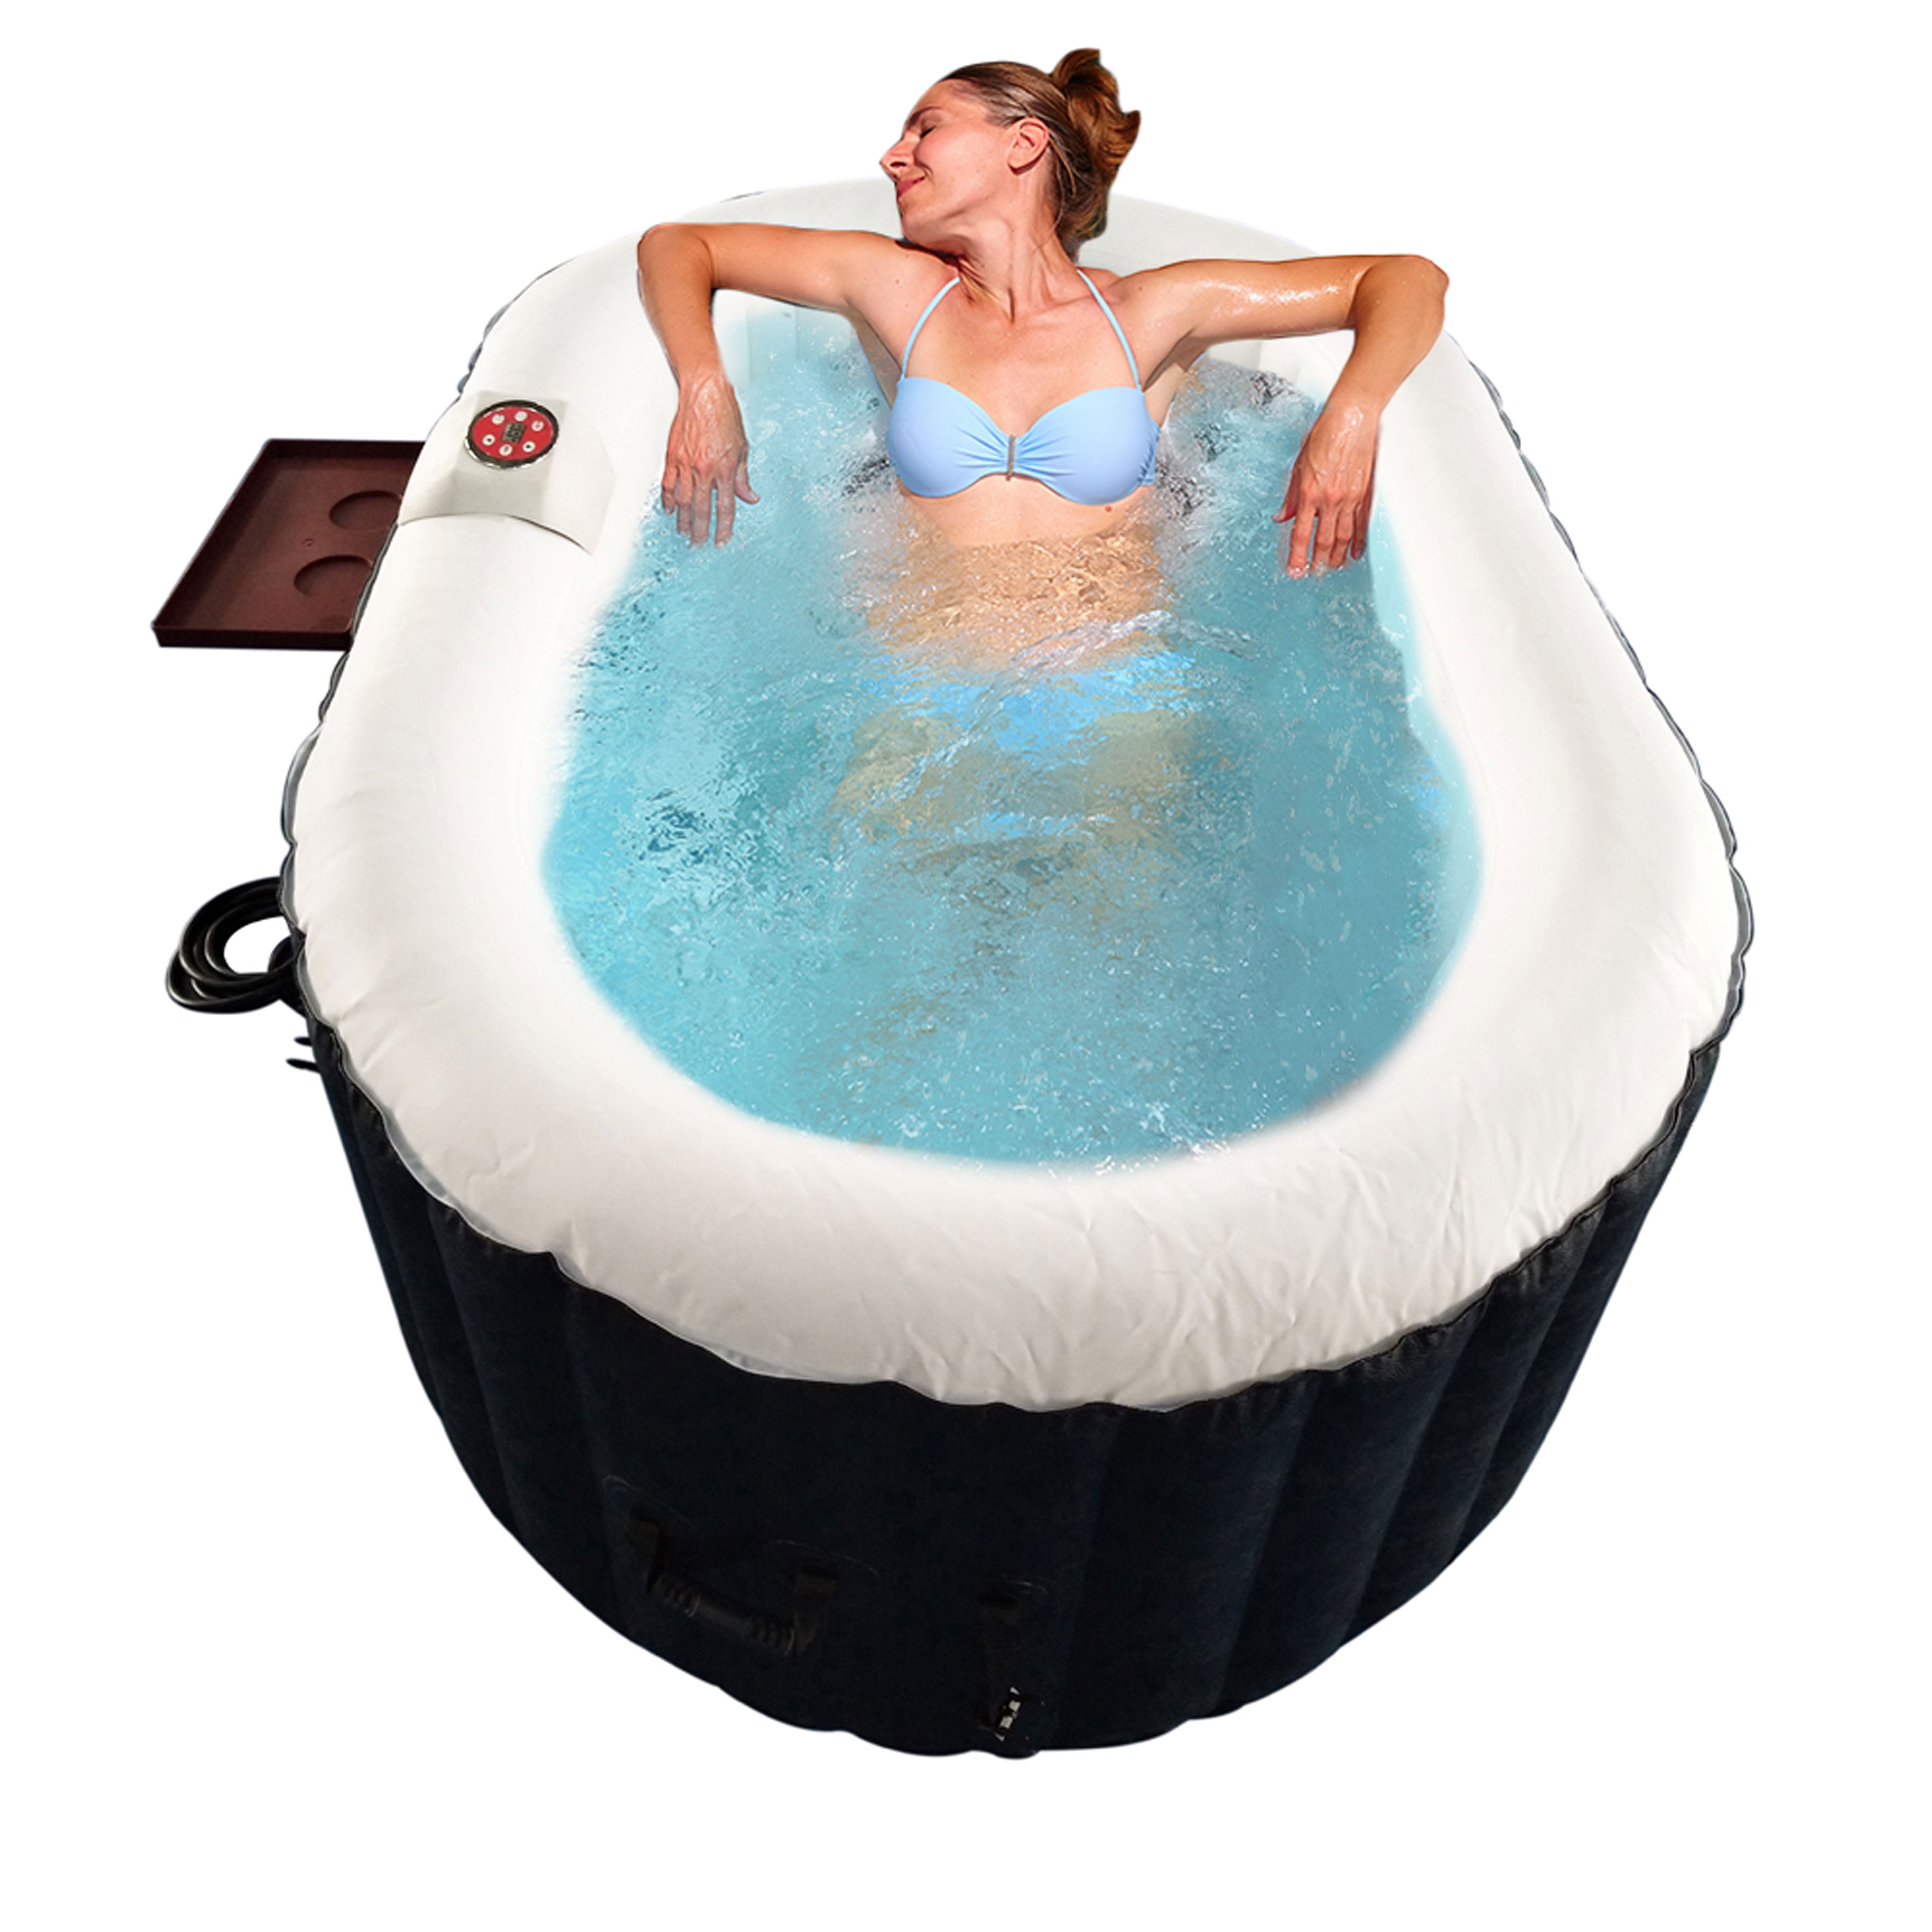 Black Drink Tray Cover and 6 Filters 2 Person Portable Hot Tub 145 Gallon ALEKO Oval Inflatable High Powered Bubble Jetted Hot Tub Spa with Fitted Cover 